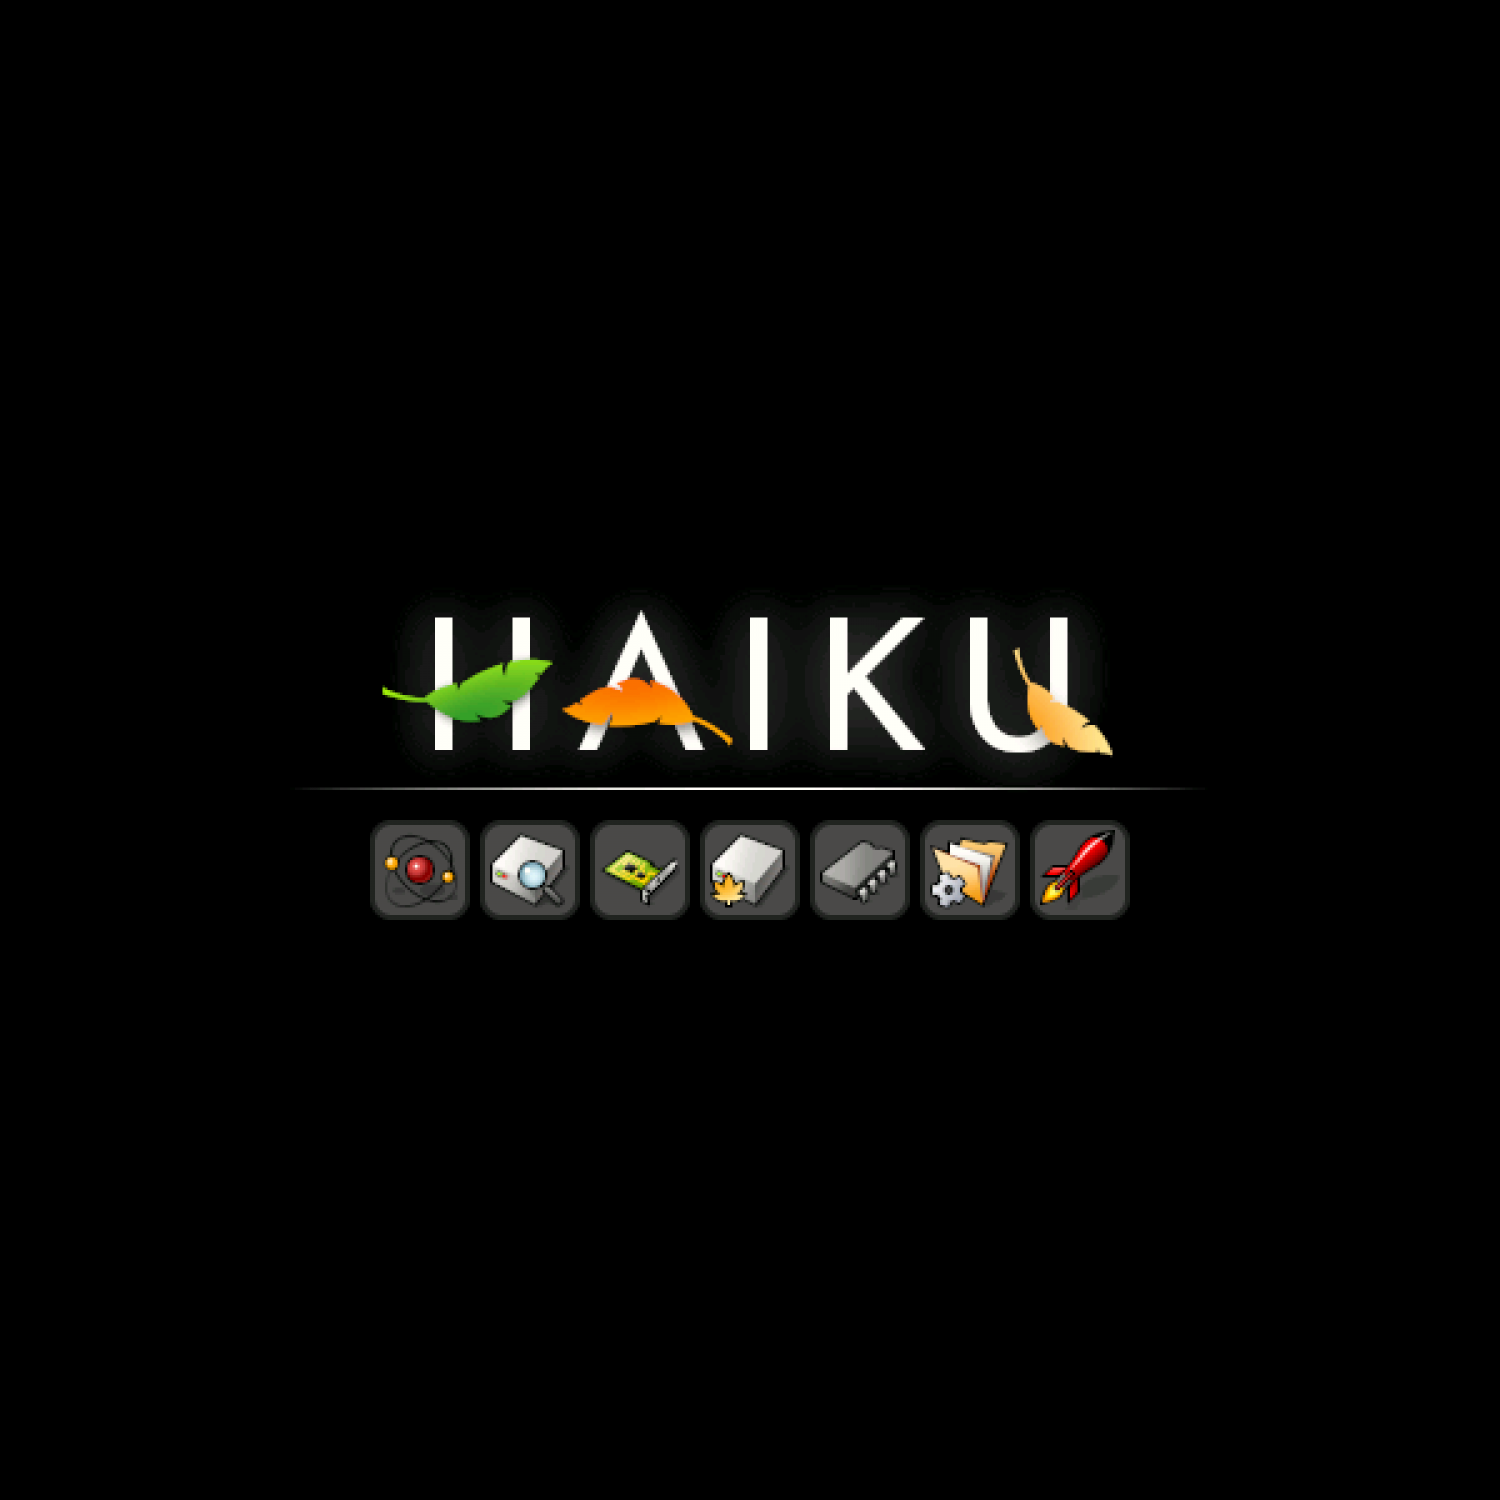 Giving Haiku Beta 3 A Try: Thoughts & Experiences - Marc Stuff